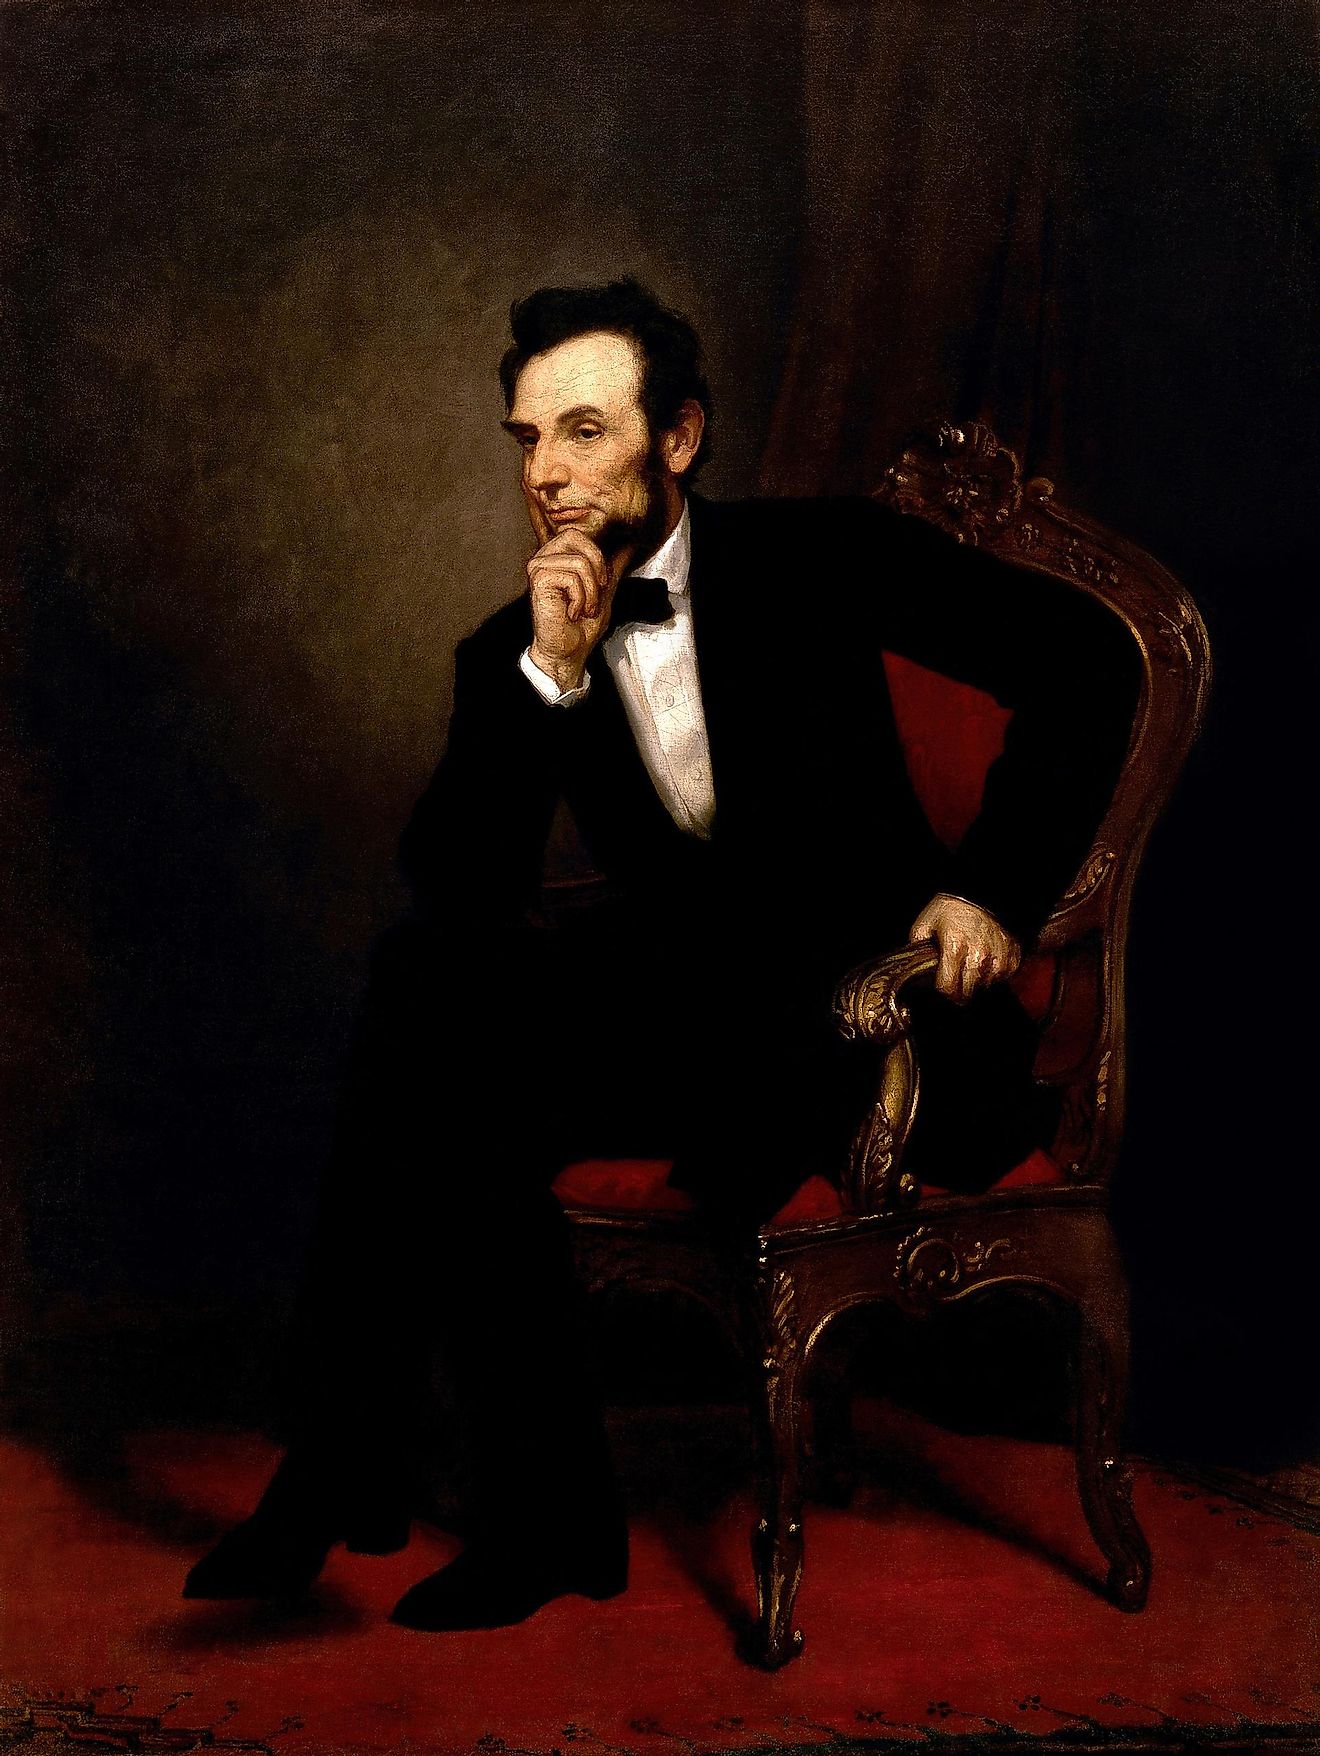 A painting of Abraham Lincoln